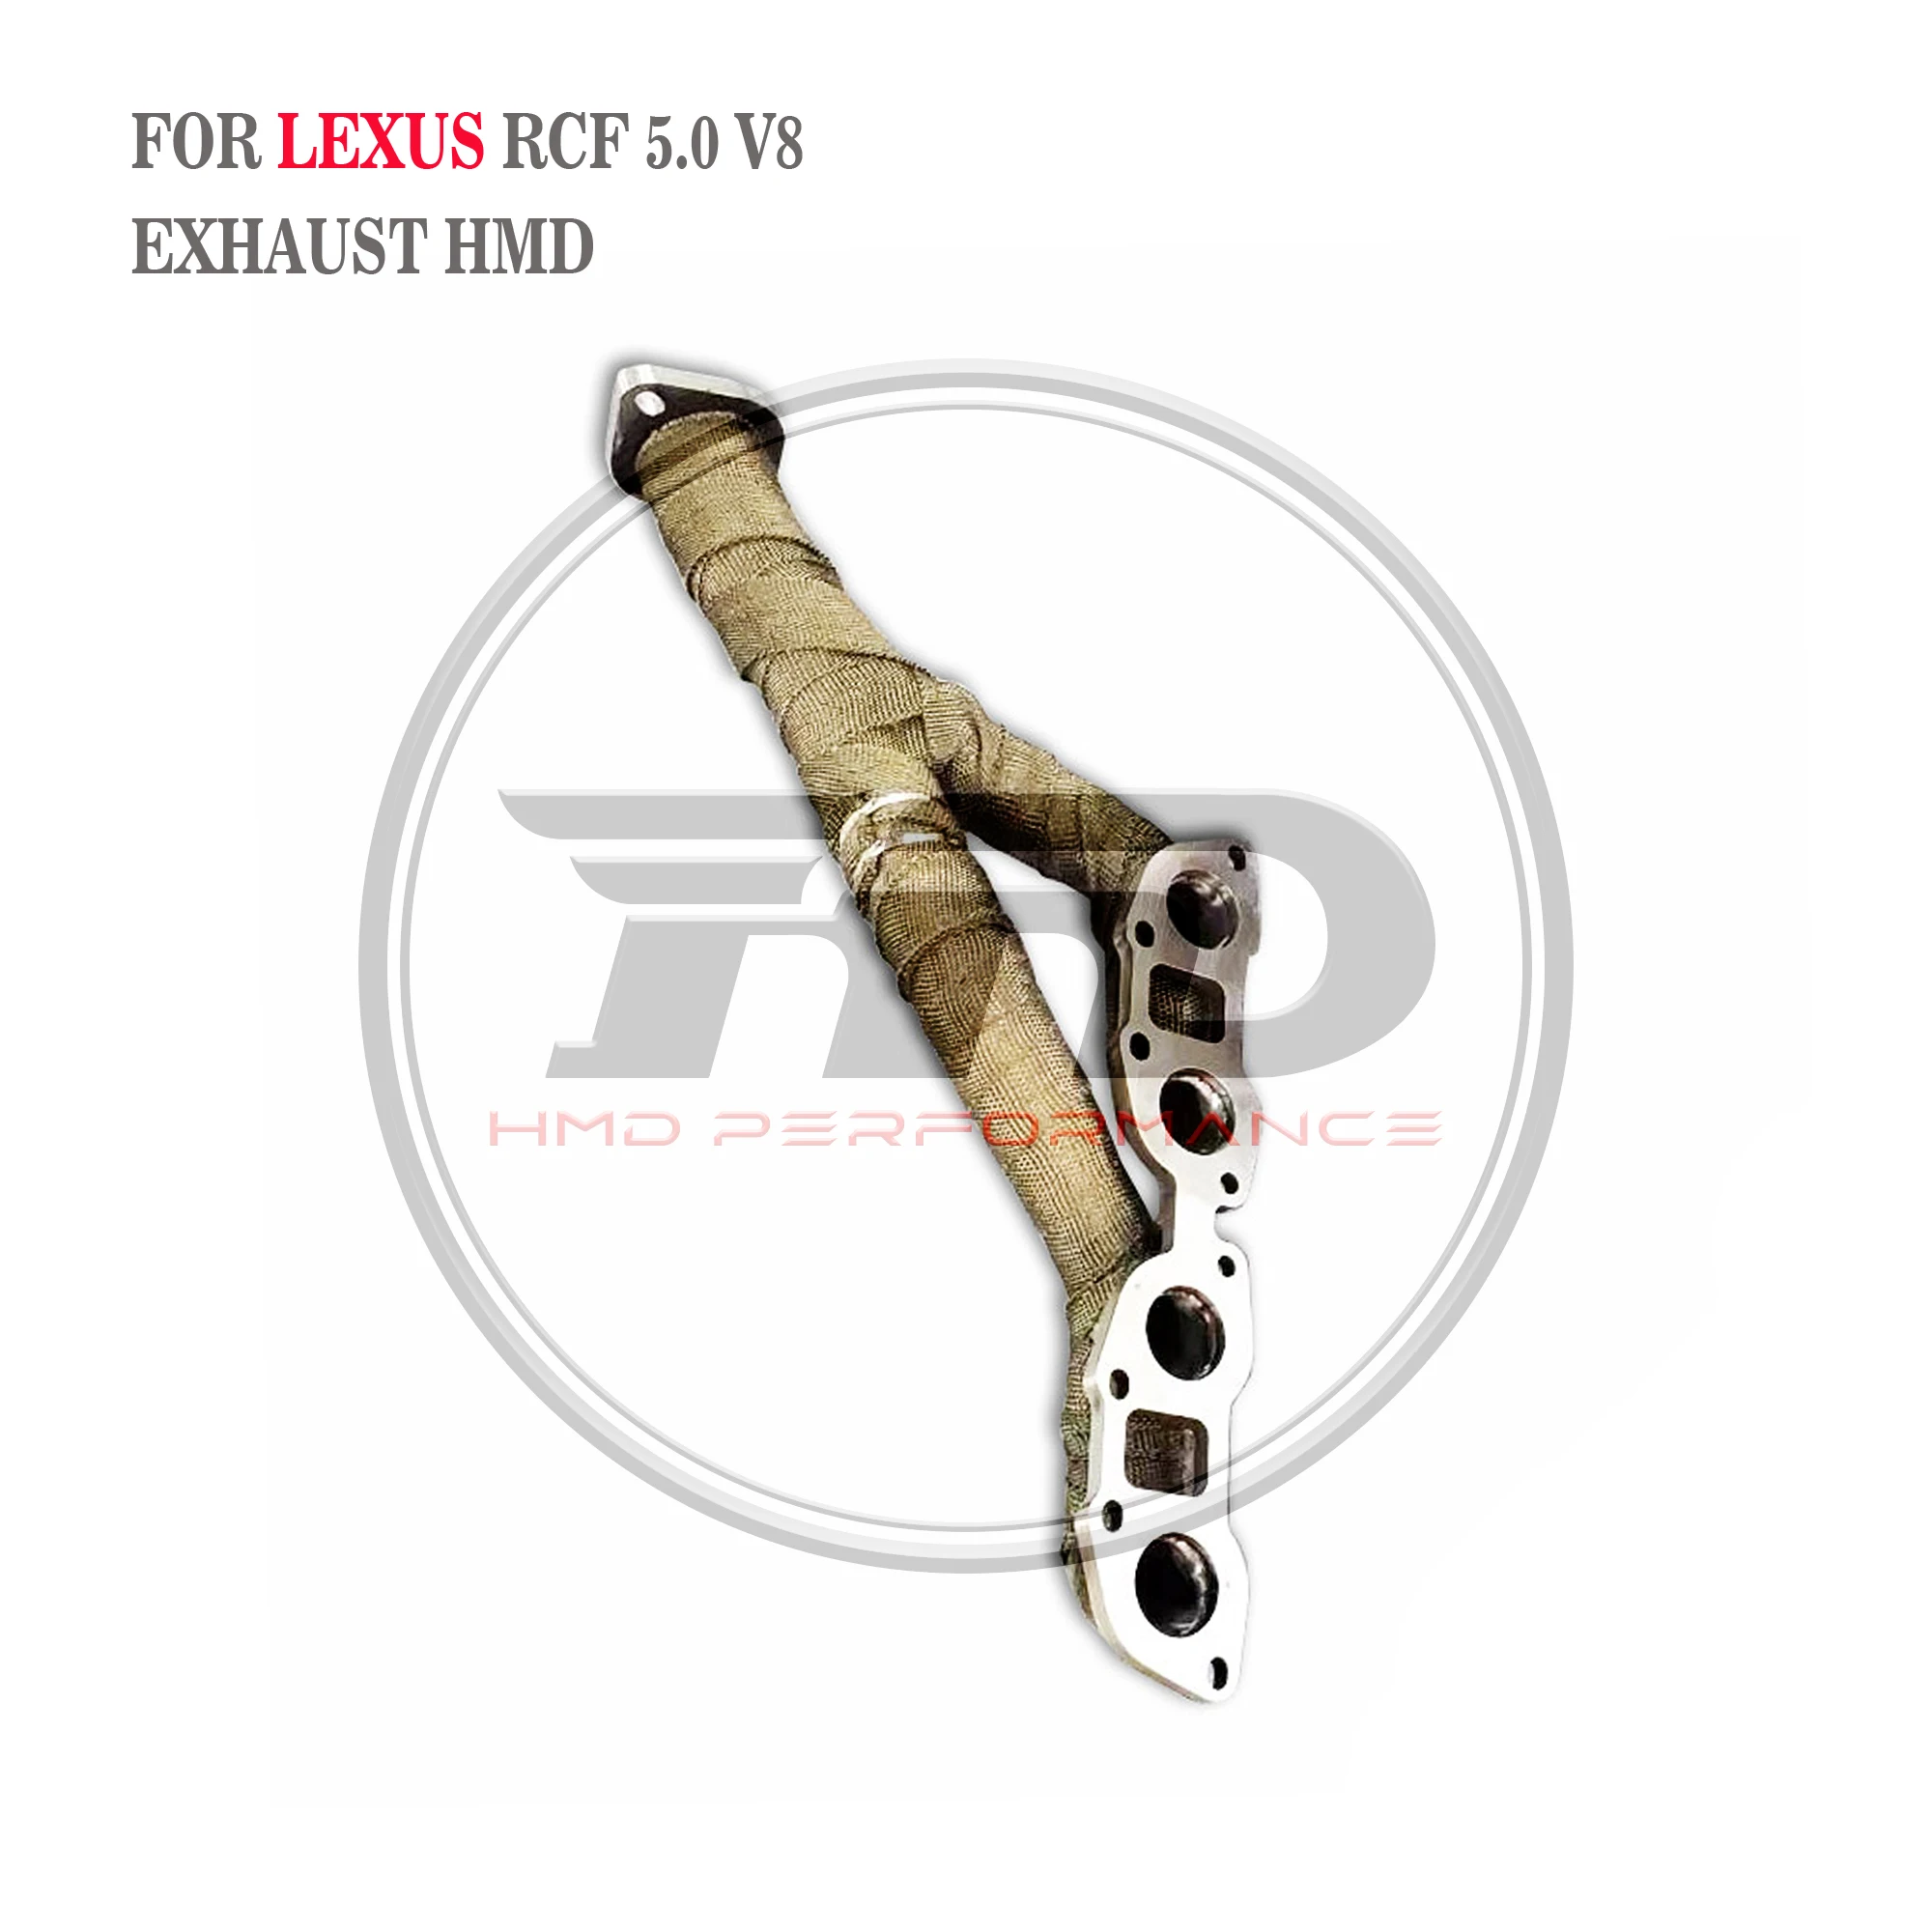 

HMD Exhaust System For LEXUS RCF 5.0 V8 Exhaust Manifold With Insulation